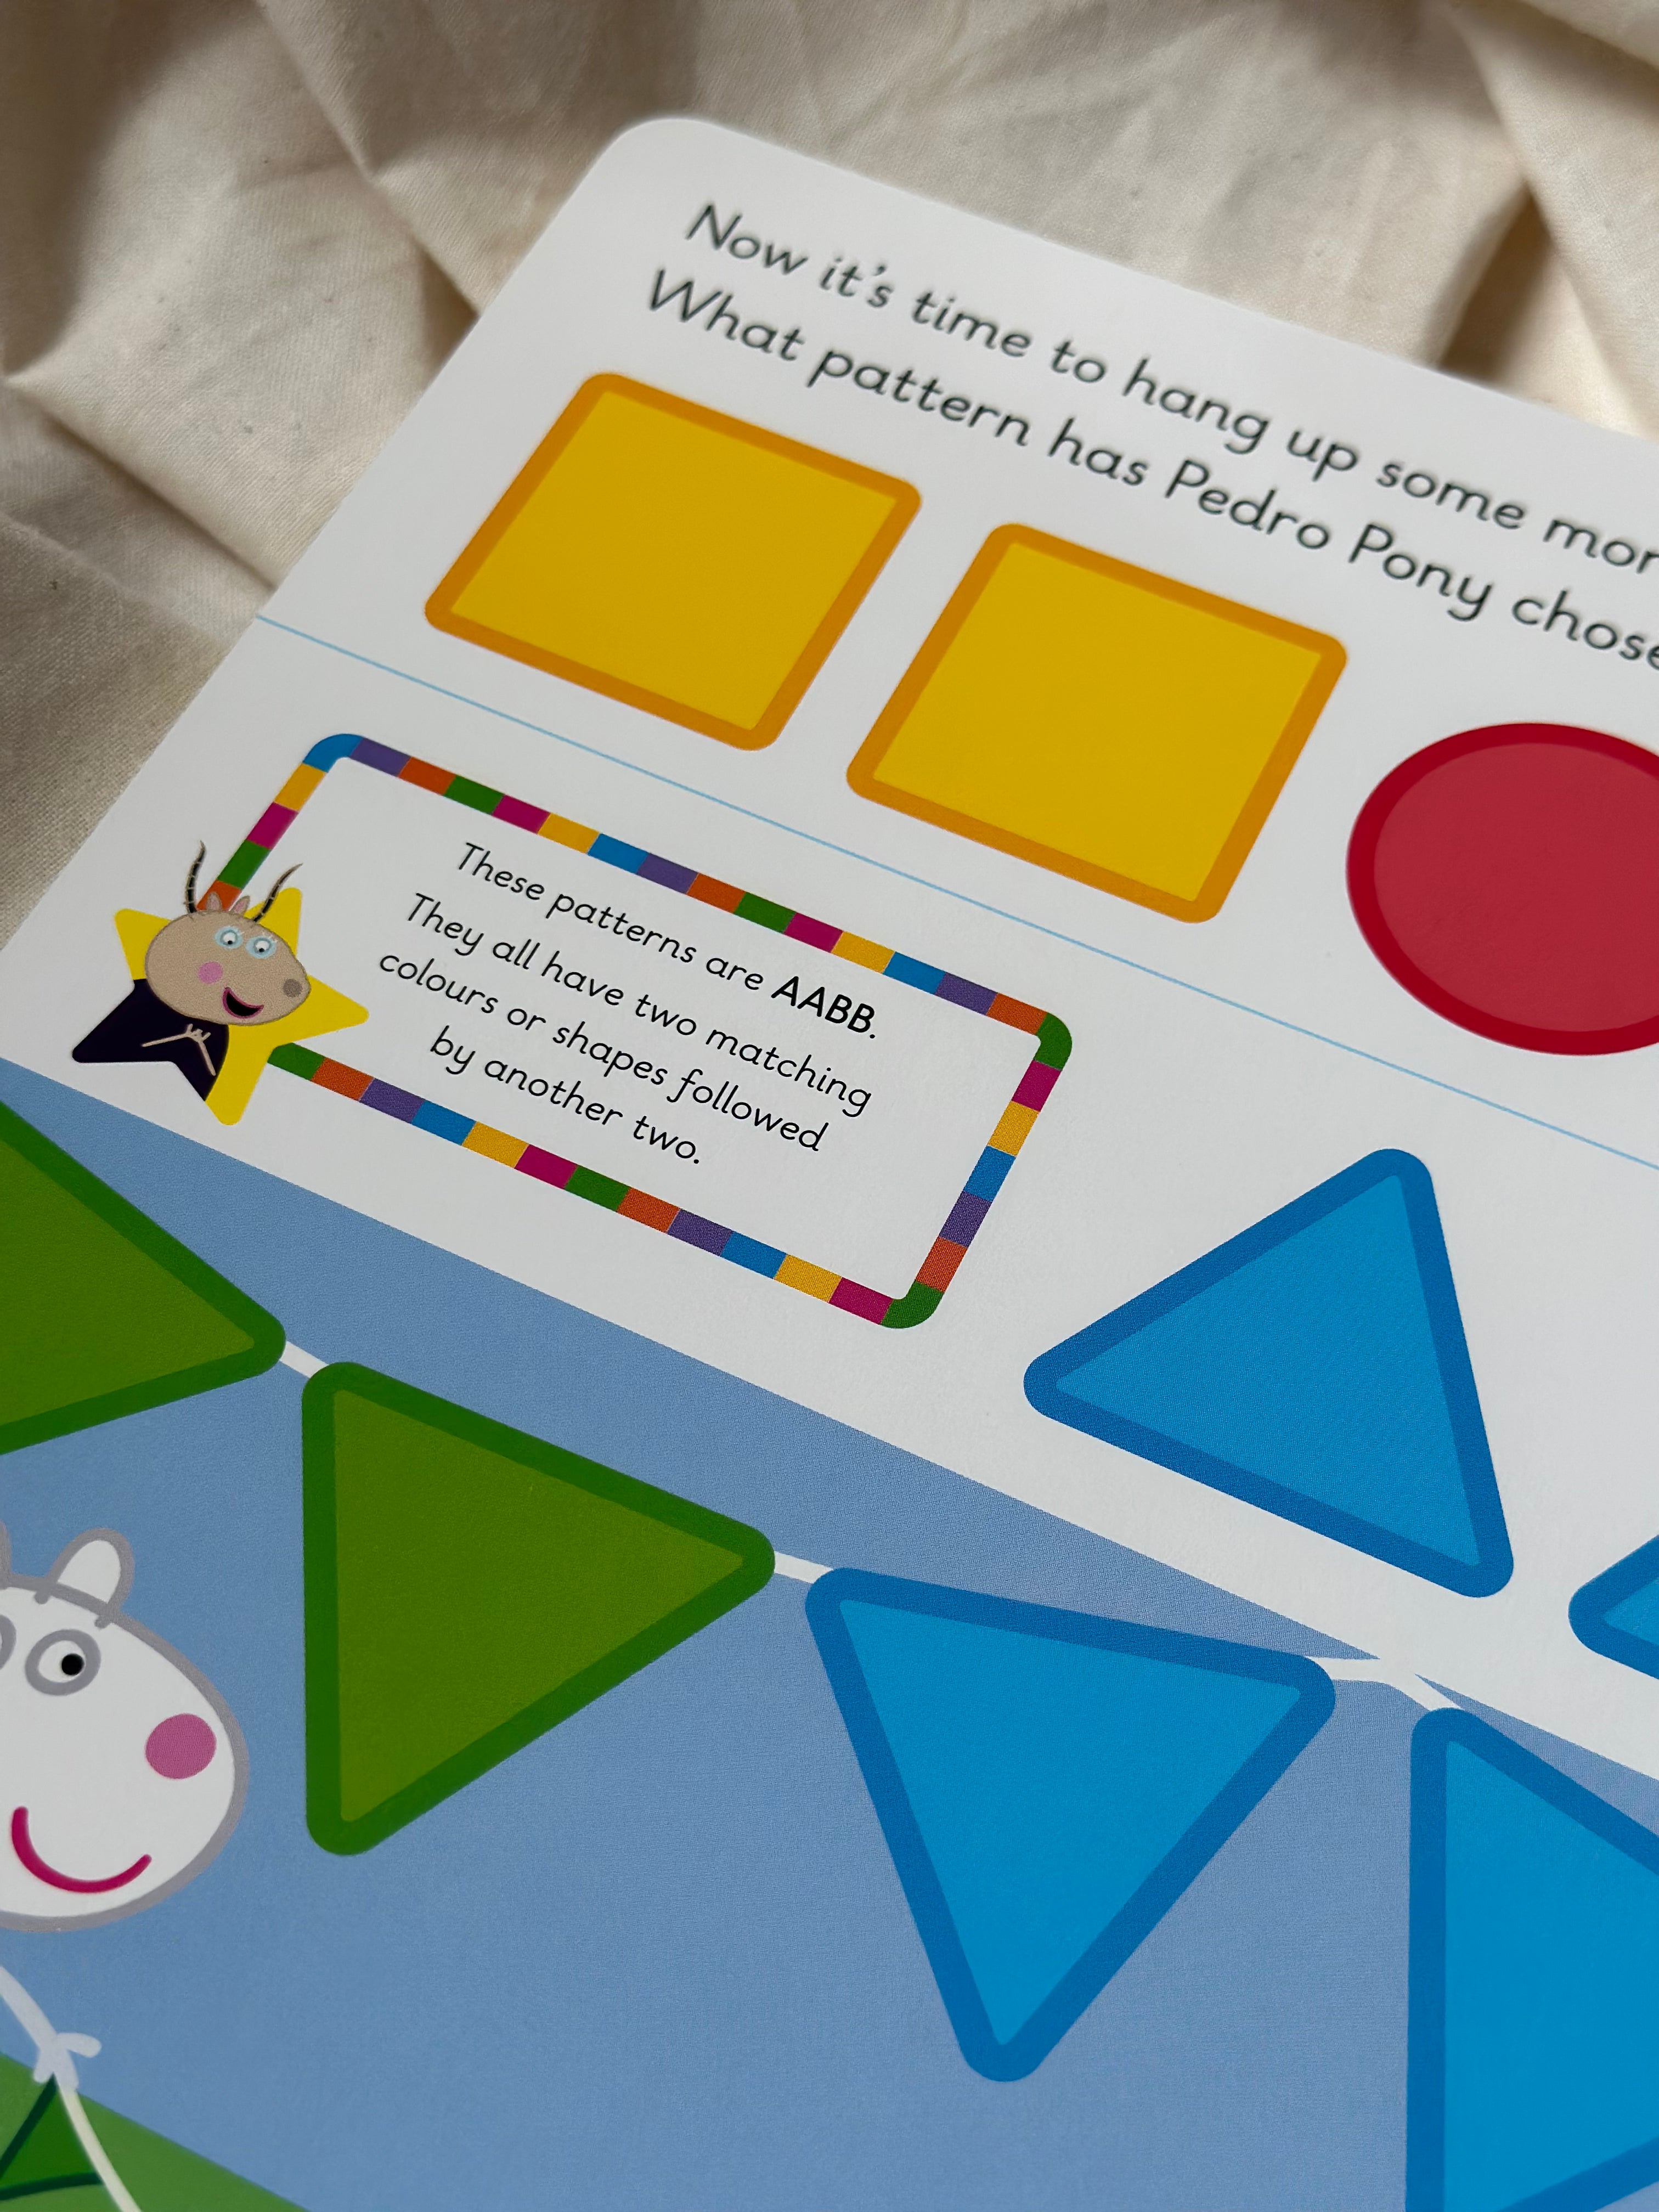 Learn with Peppa: Peppa's Patterns and Shapes [Book]